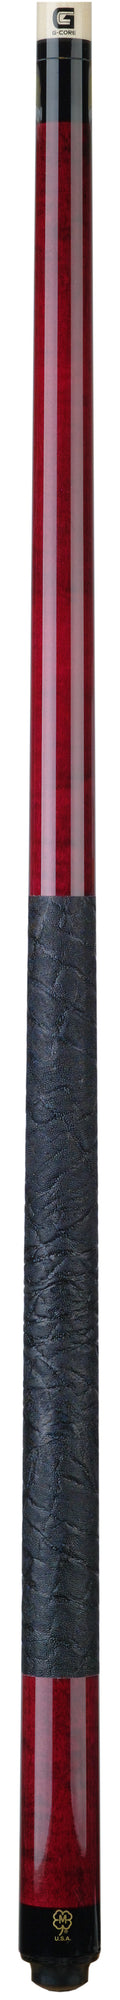 McDermott McDermott GS03 Pool Cue - GCore Special Promo - Leather Wrap Pool Cue